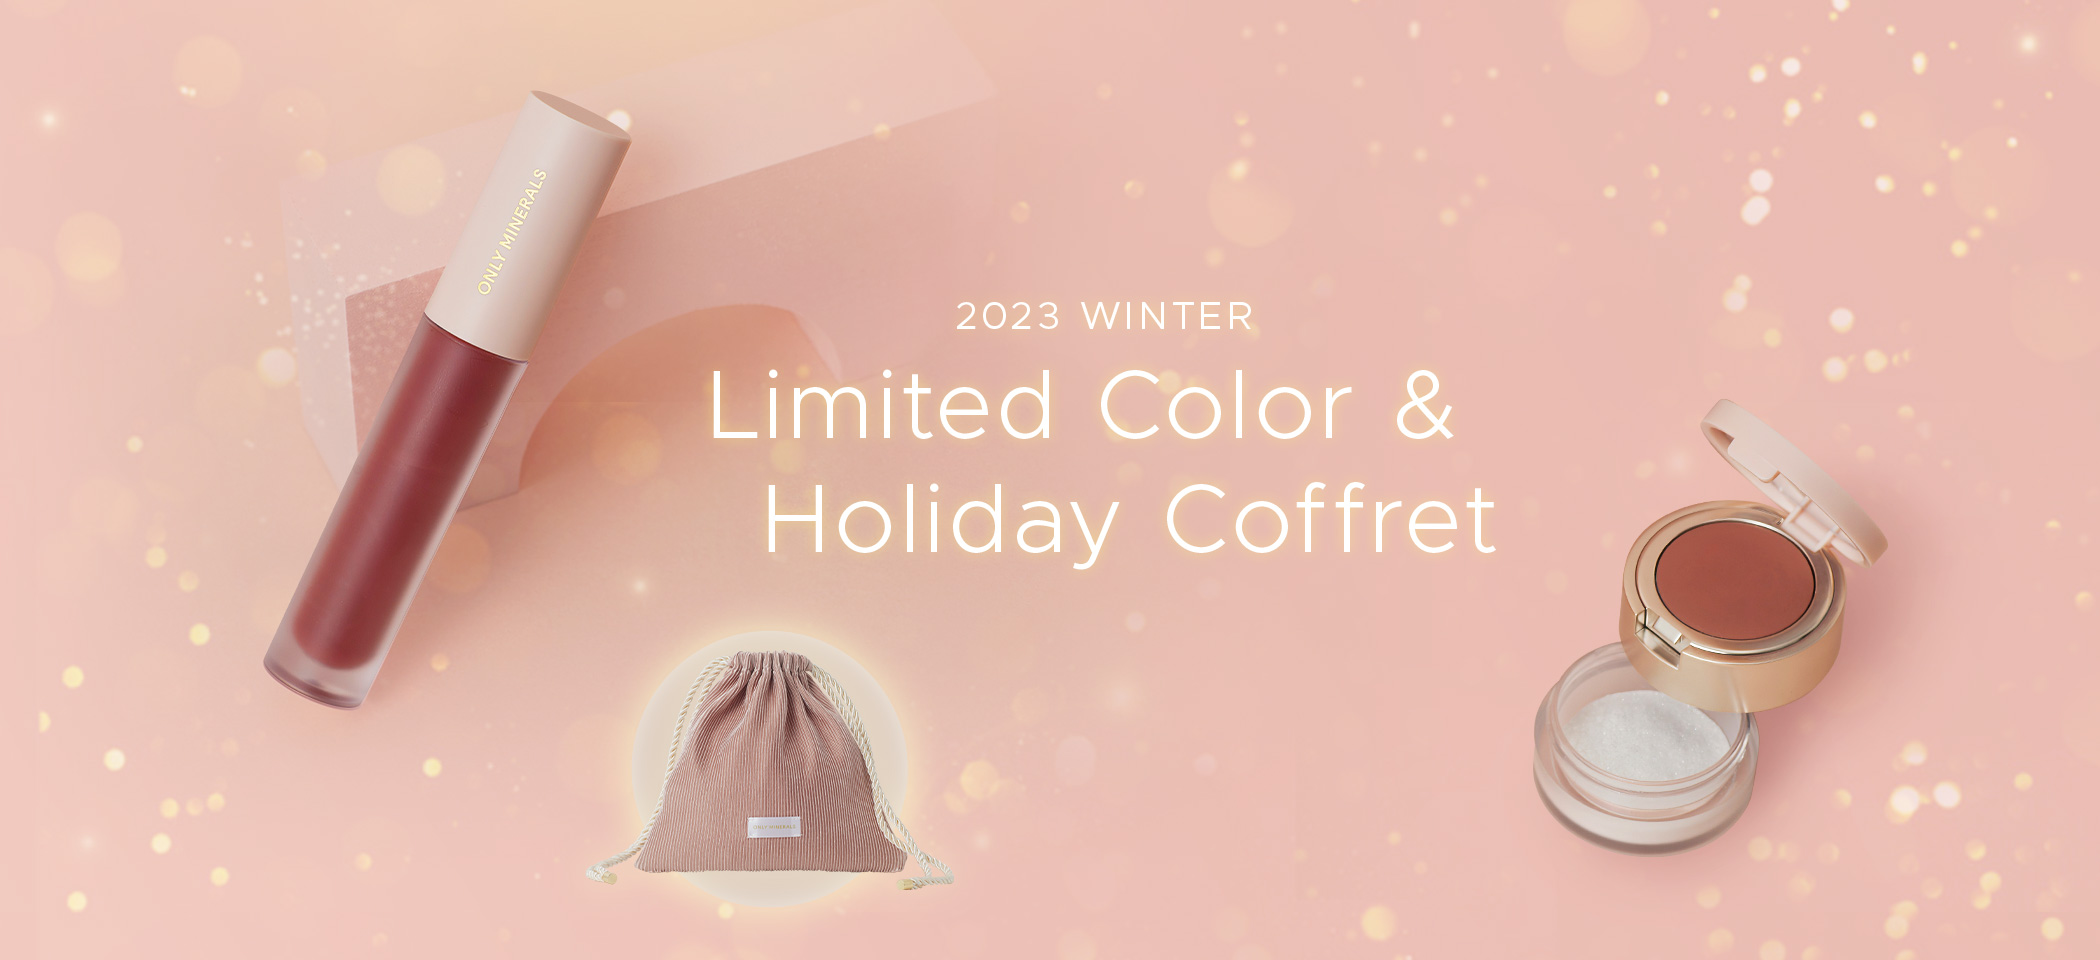 Limited Color & Holiday Coffret